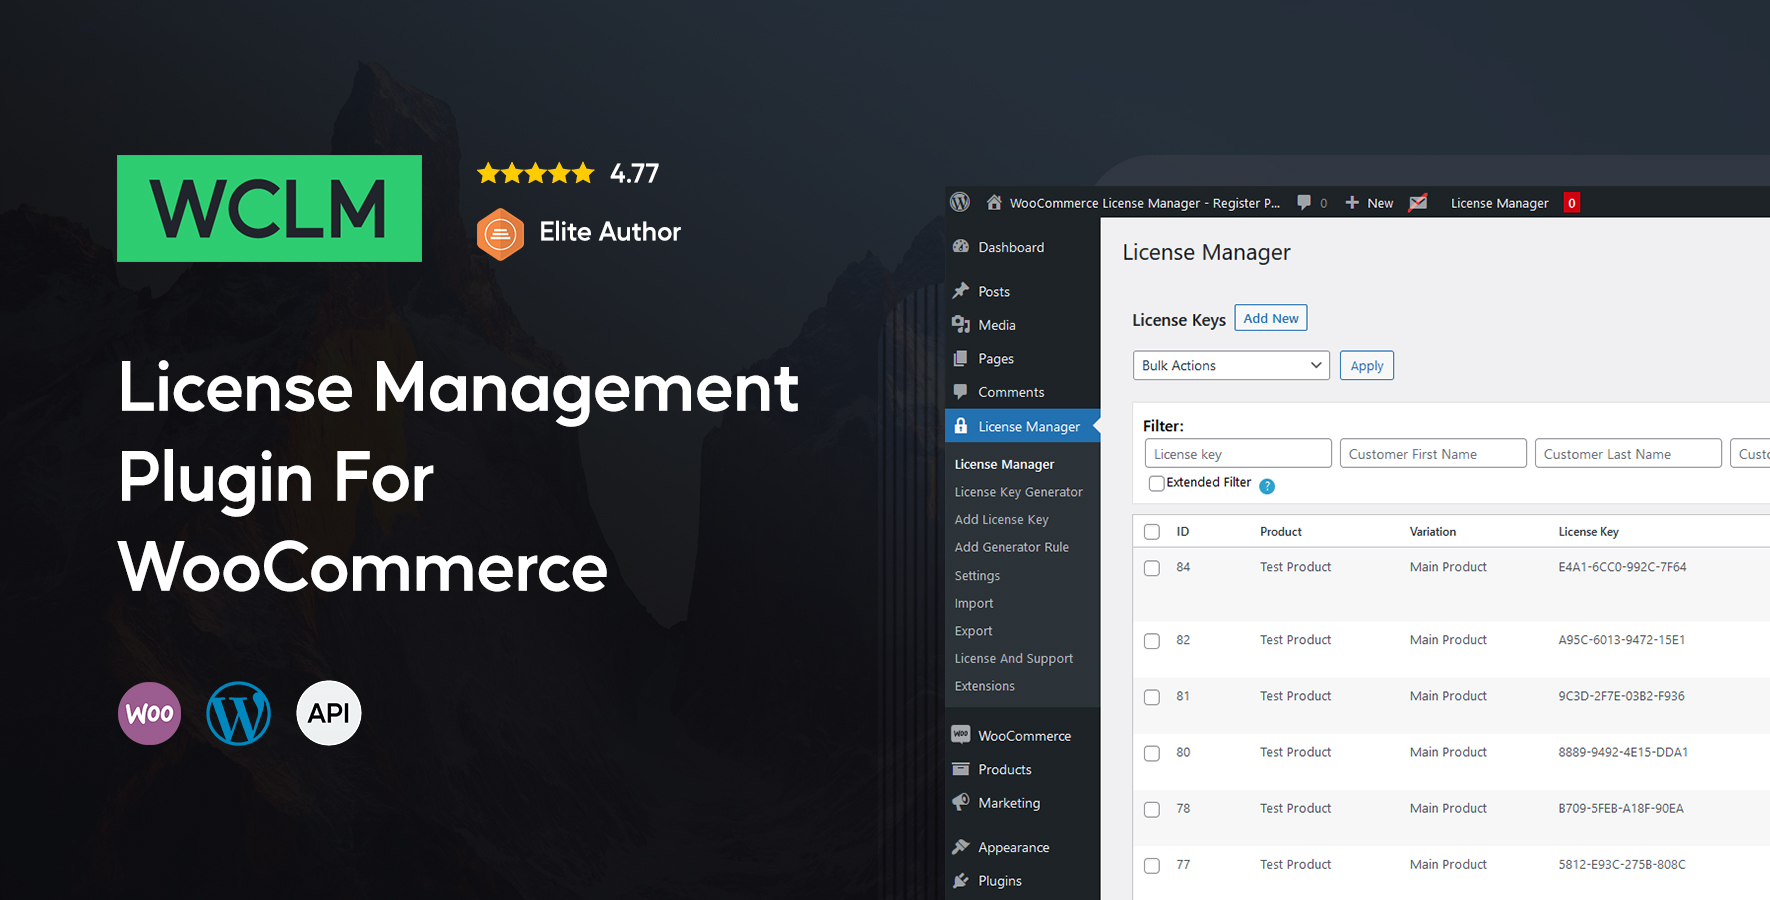 WCLM - WooCommerce License Manager